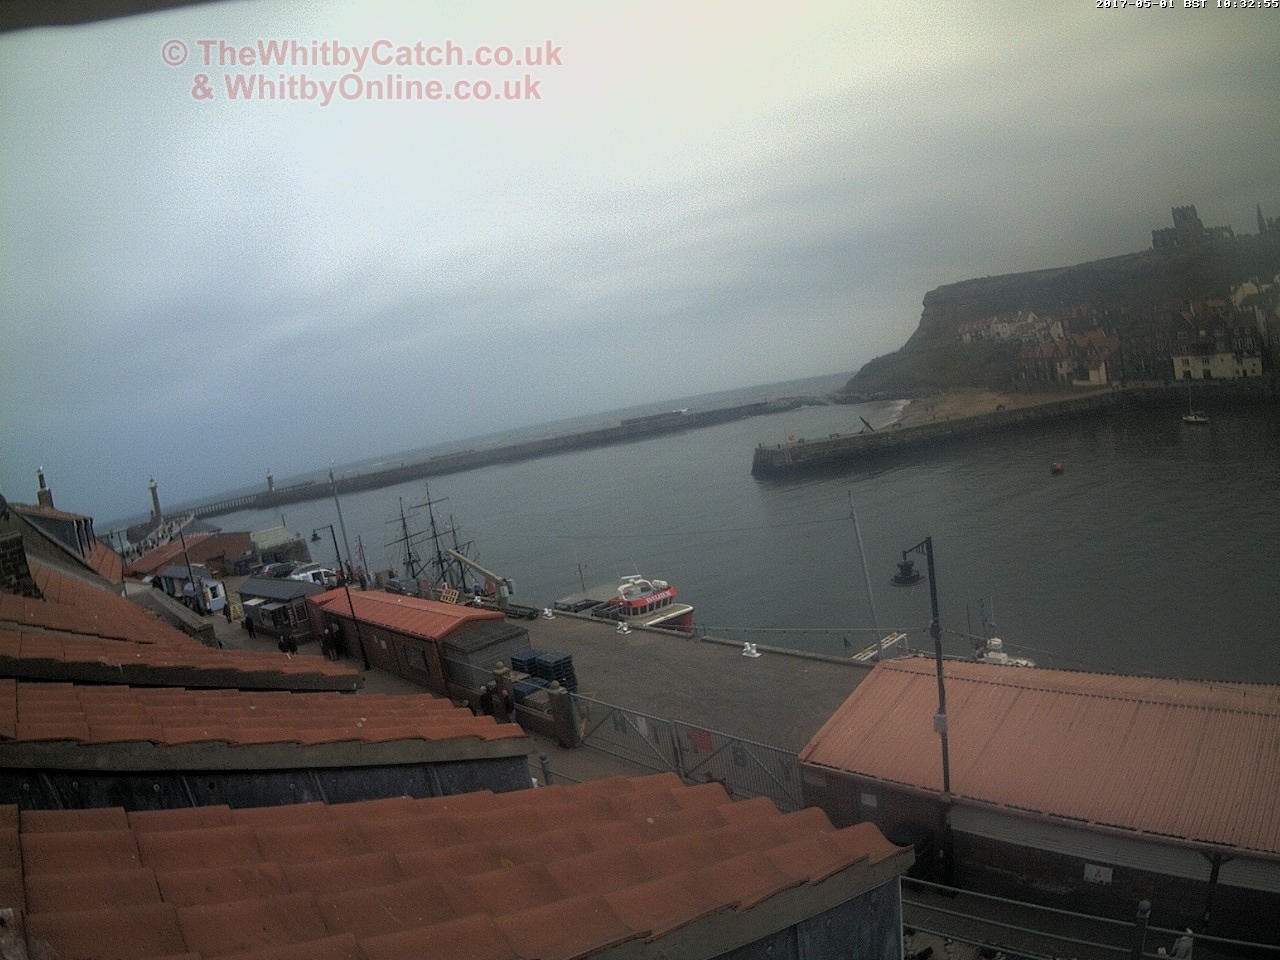 Whitby Mon 1st May 2017 10:33.